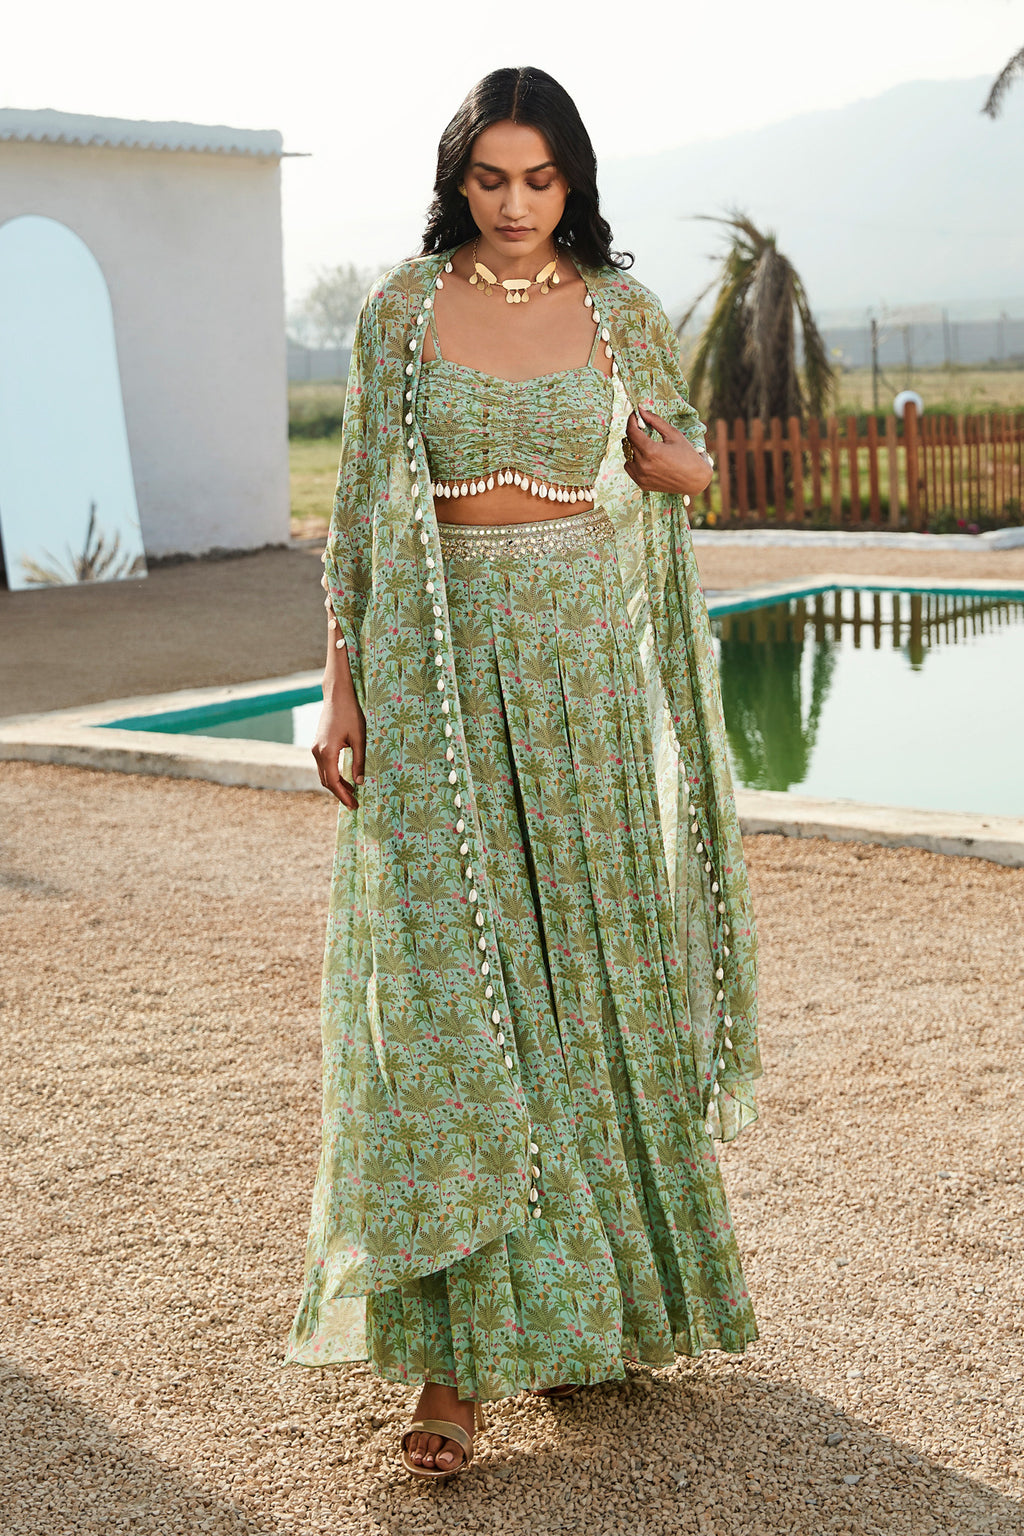 Buy printed green skirt set in georgette. Dazzle on weddings and special occasions with exquisite Indian designer dresses, sharara suits, Anarkali suits, and wedding lehengas from Pure Elegance Indian fashion store in the USA.